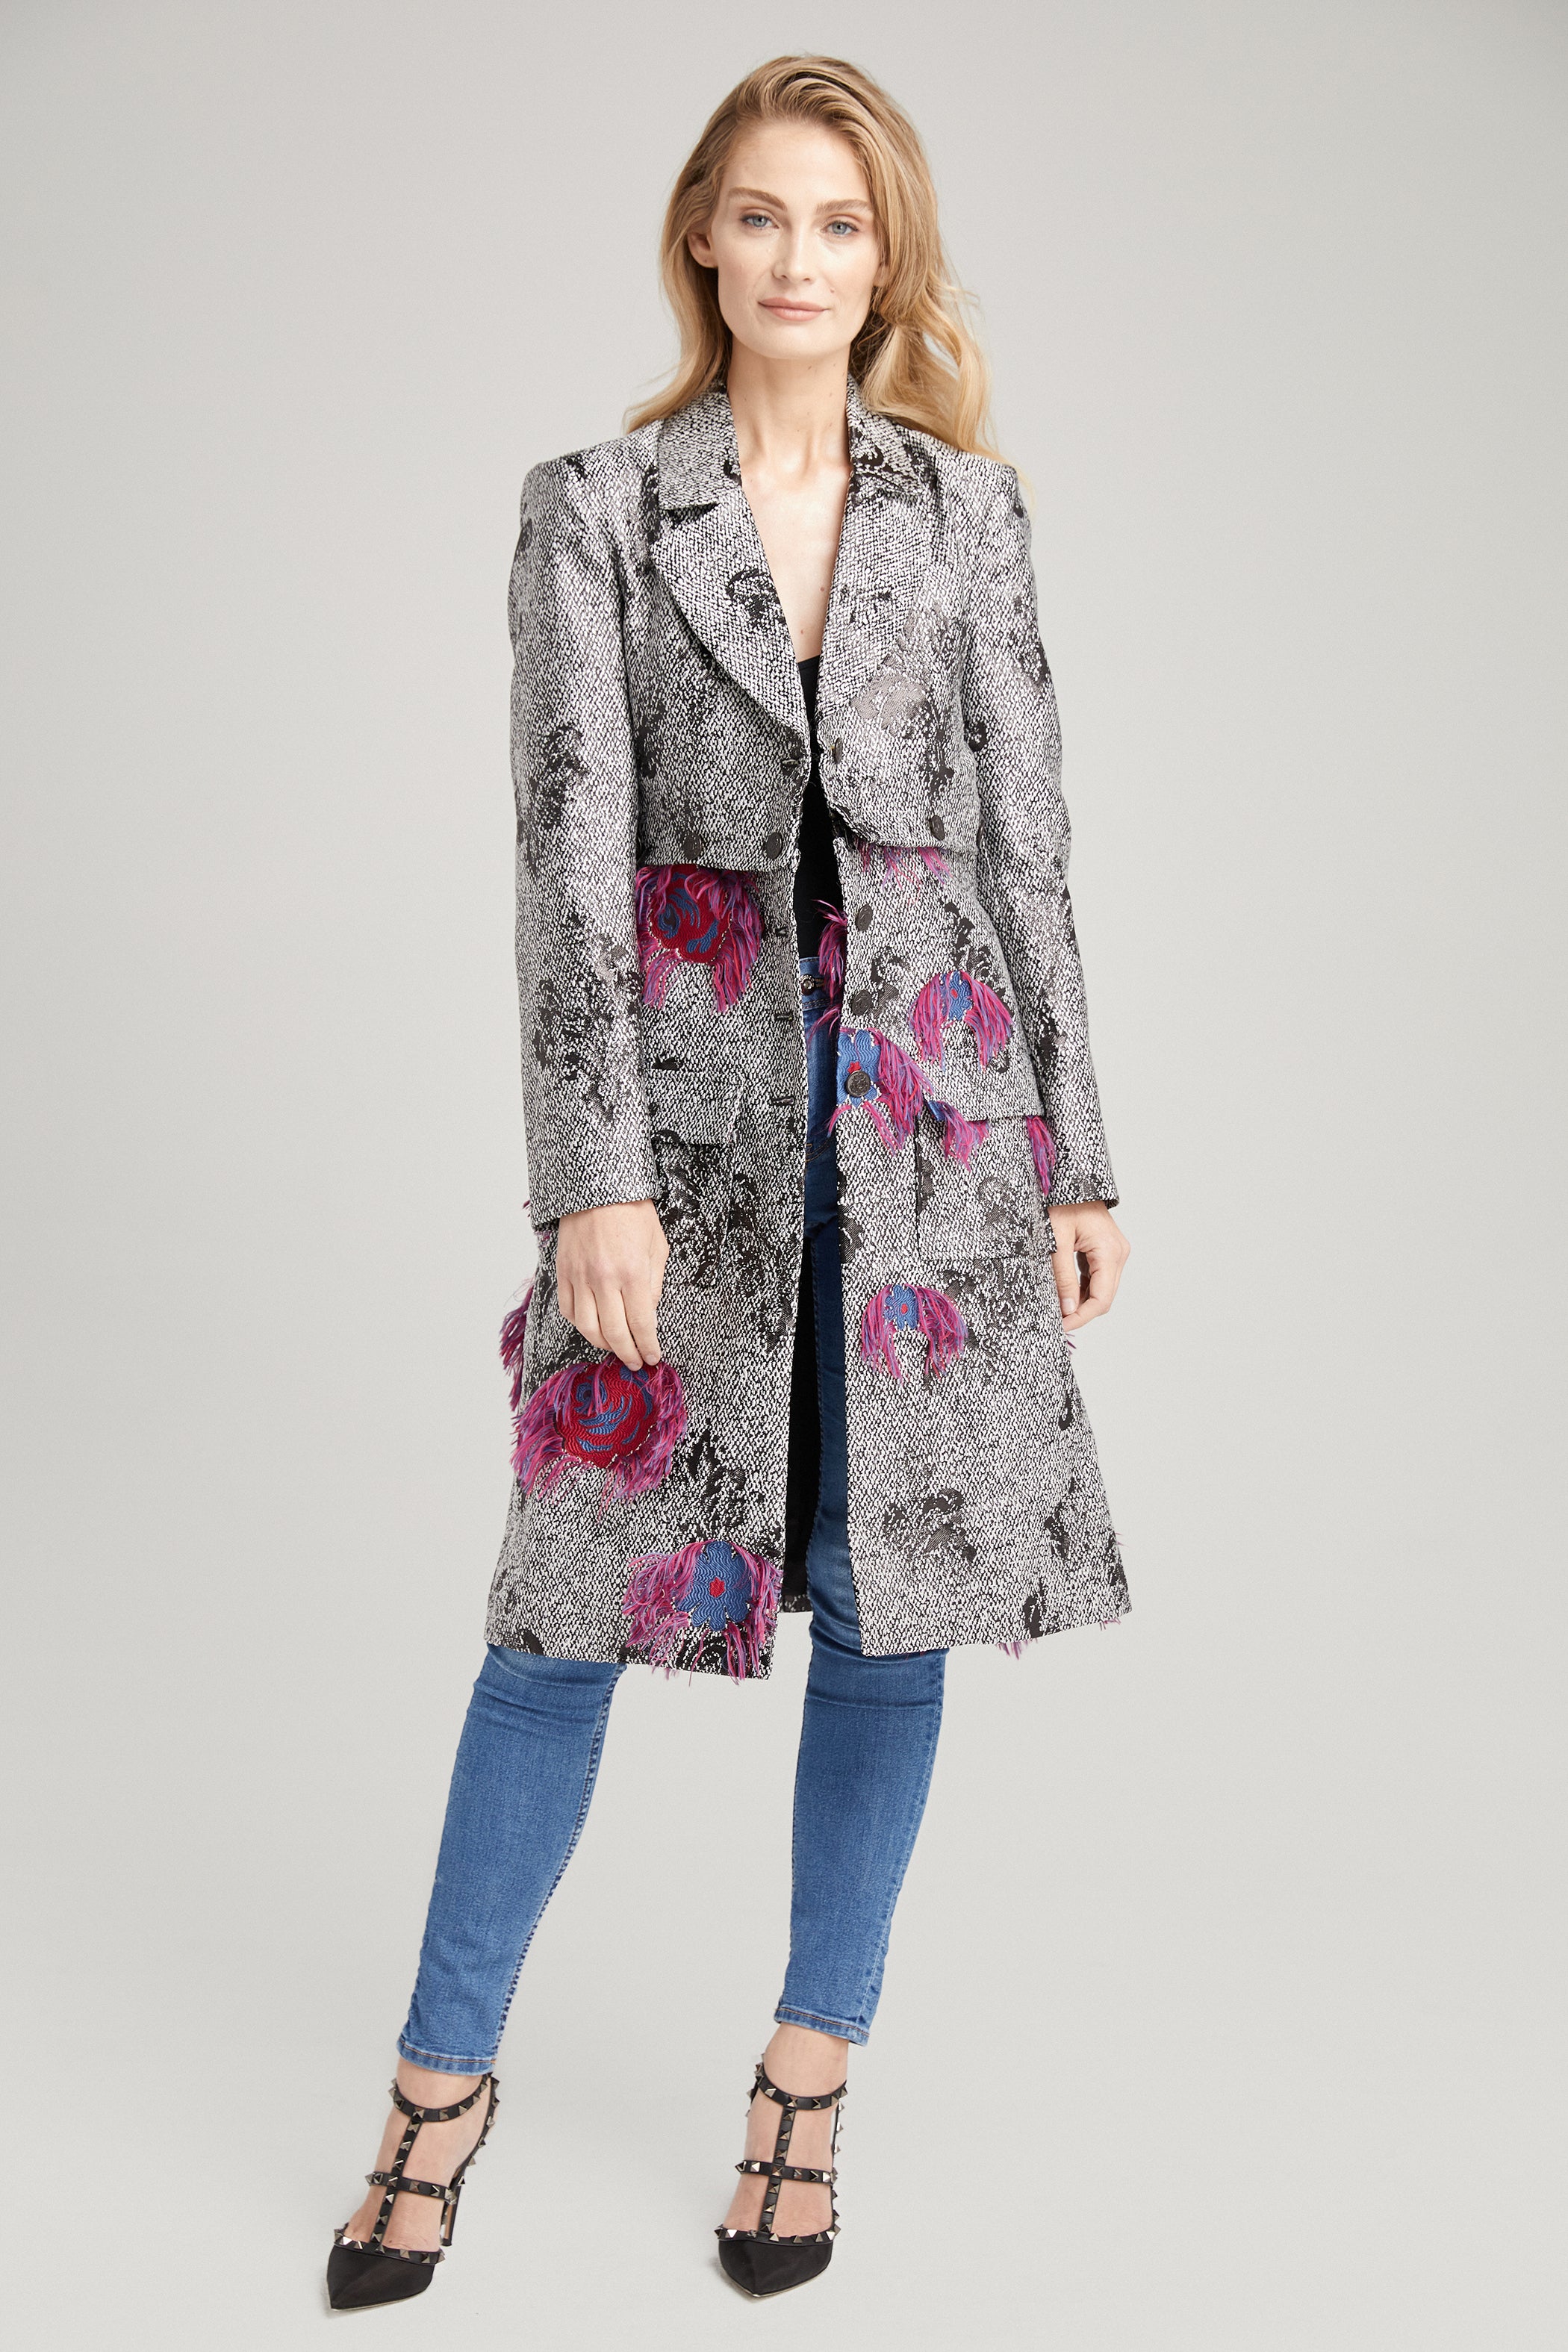 COCO FLORAL FINGE JACKET, Outerwear